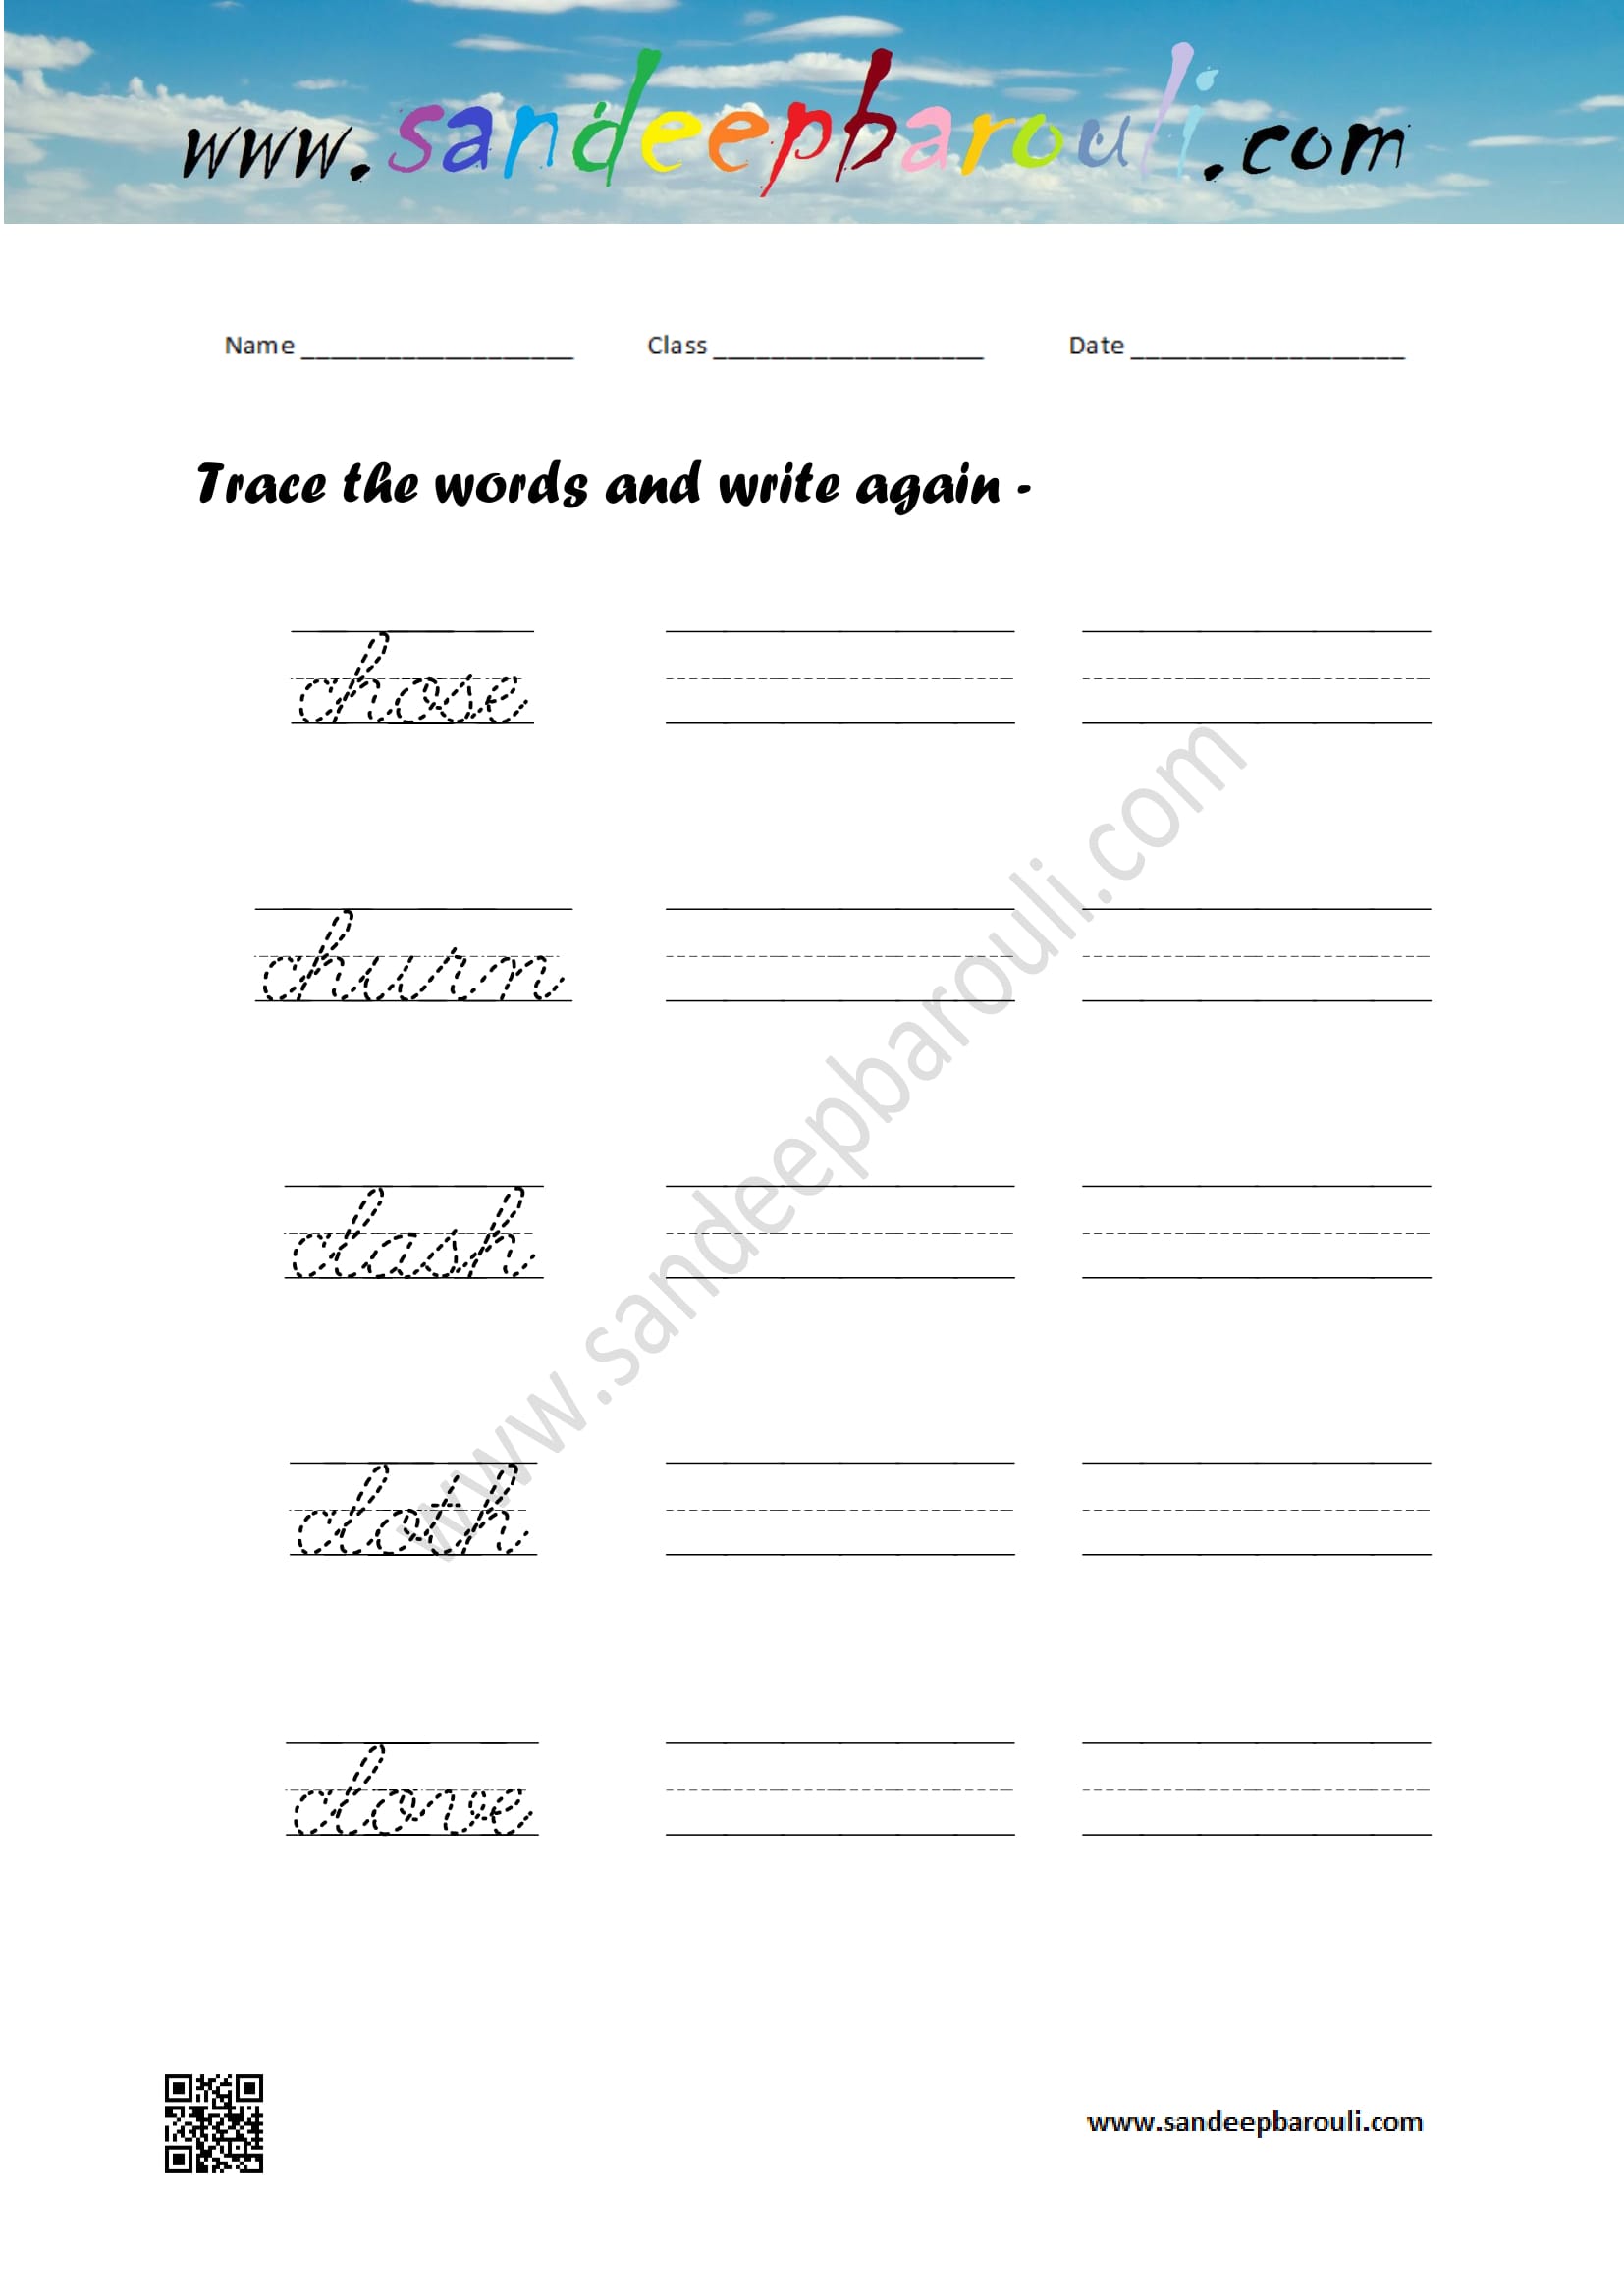 Cursive writing worksheet – trace the words and write again (90)